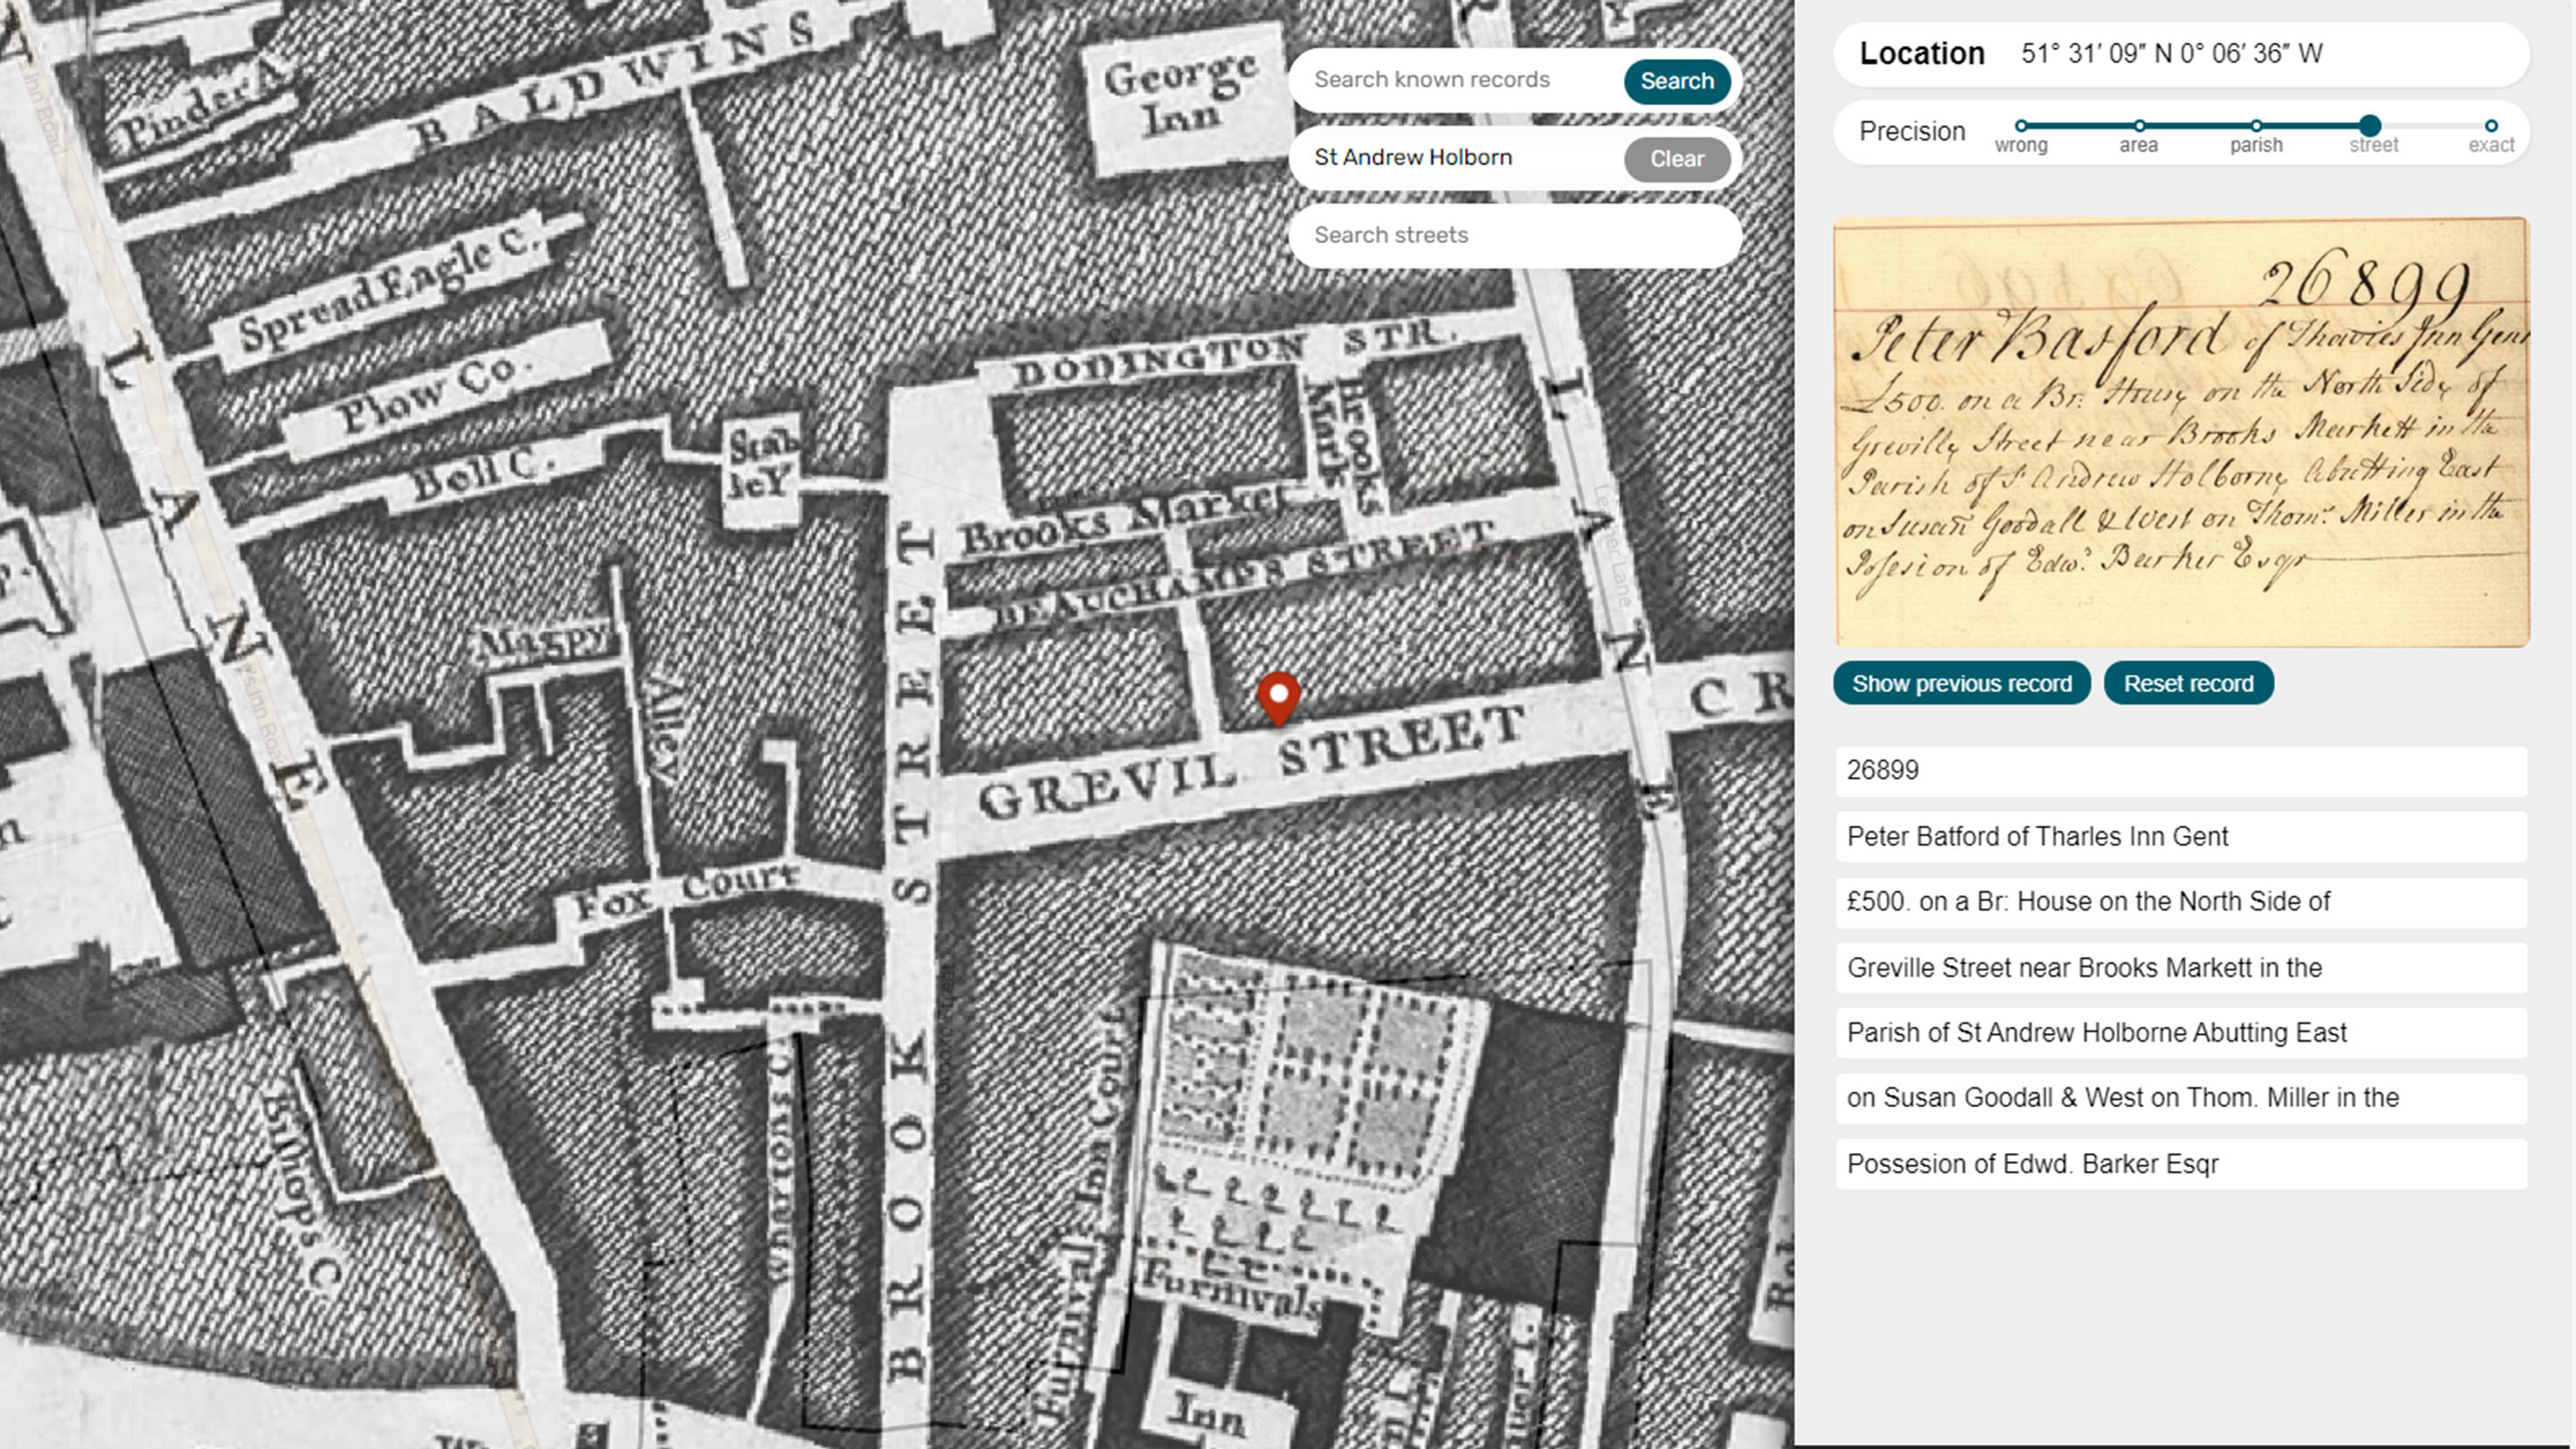 Archives mapping tool